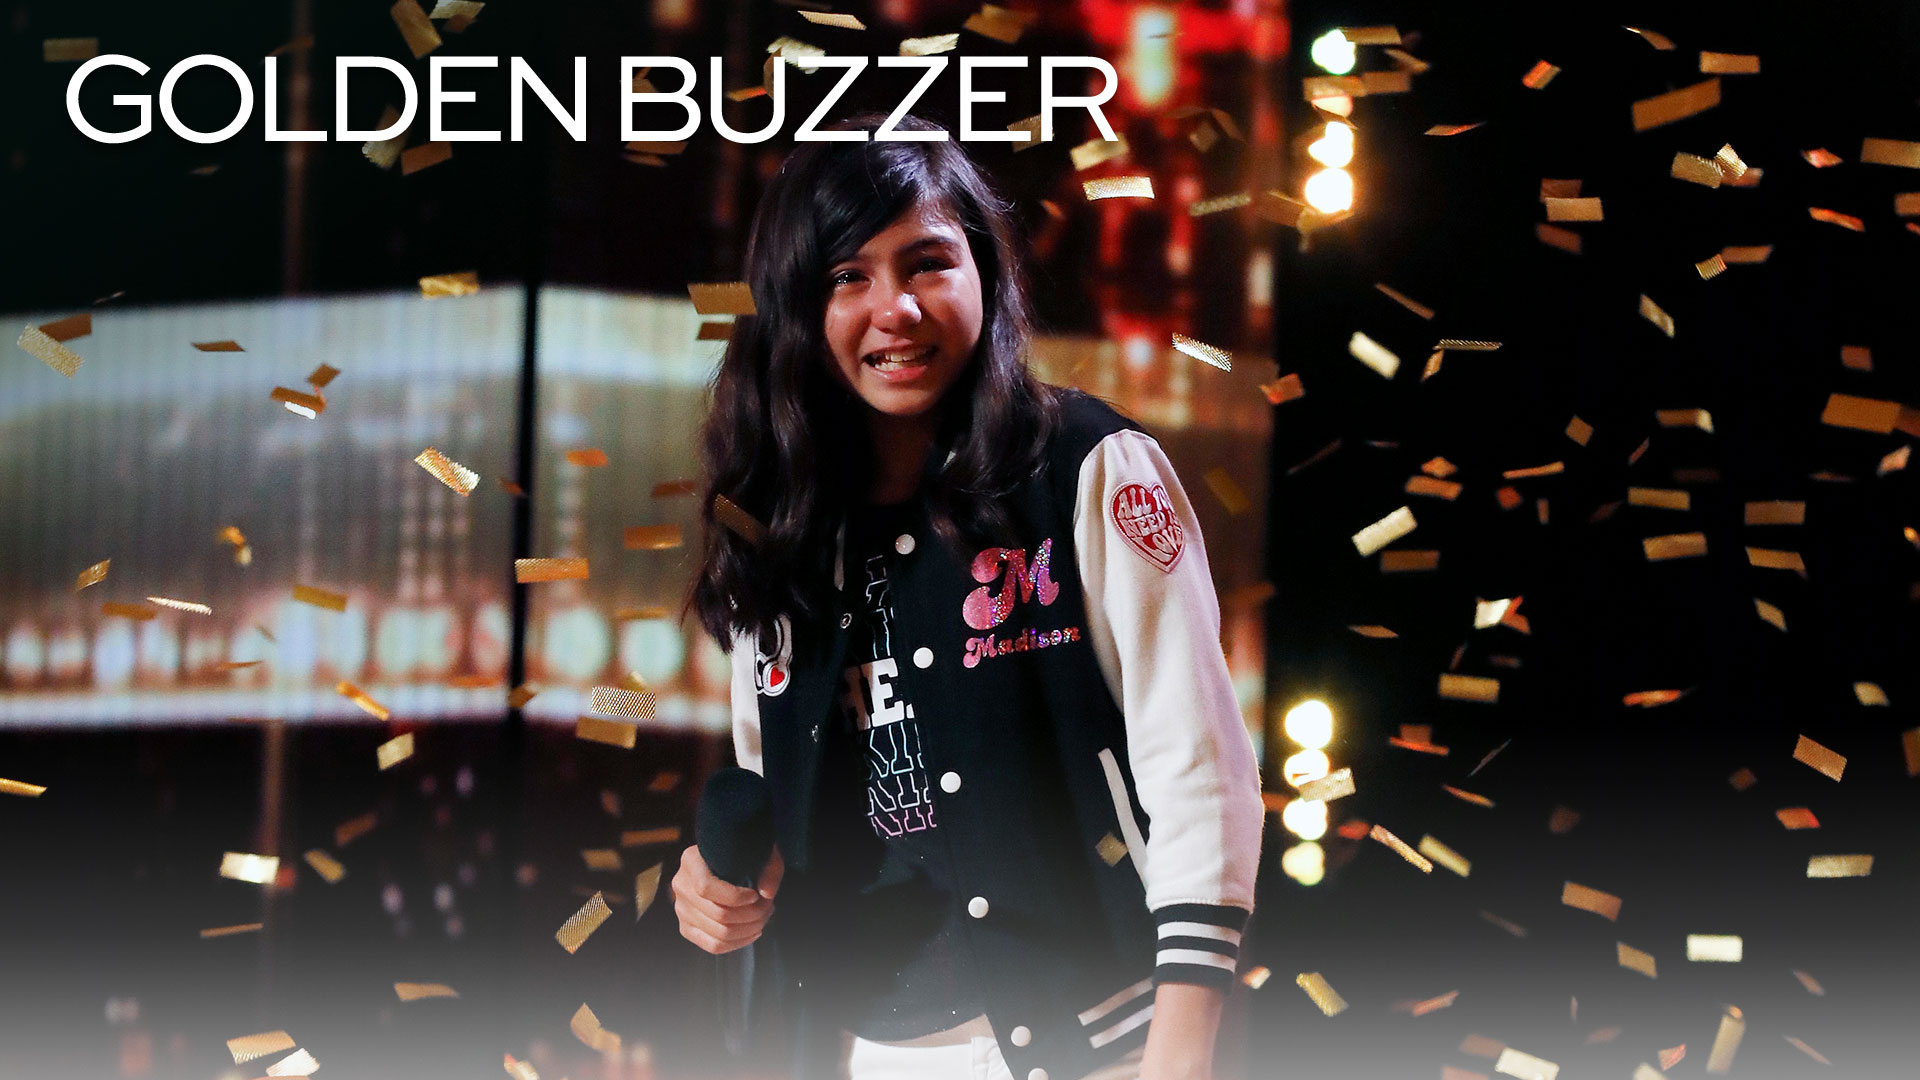 Watch Americas Got Talent Highlight Golden Buzzer From The Audience To The Stage Maddie